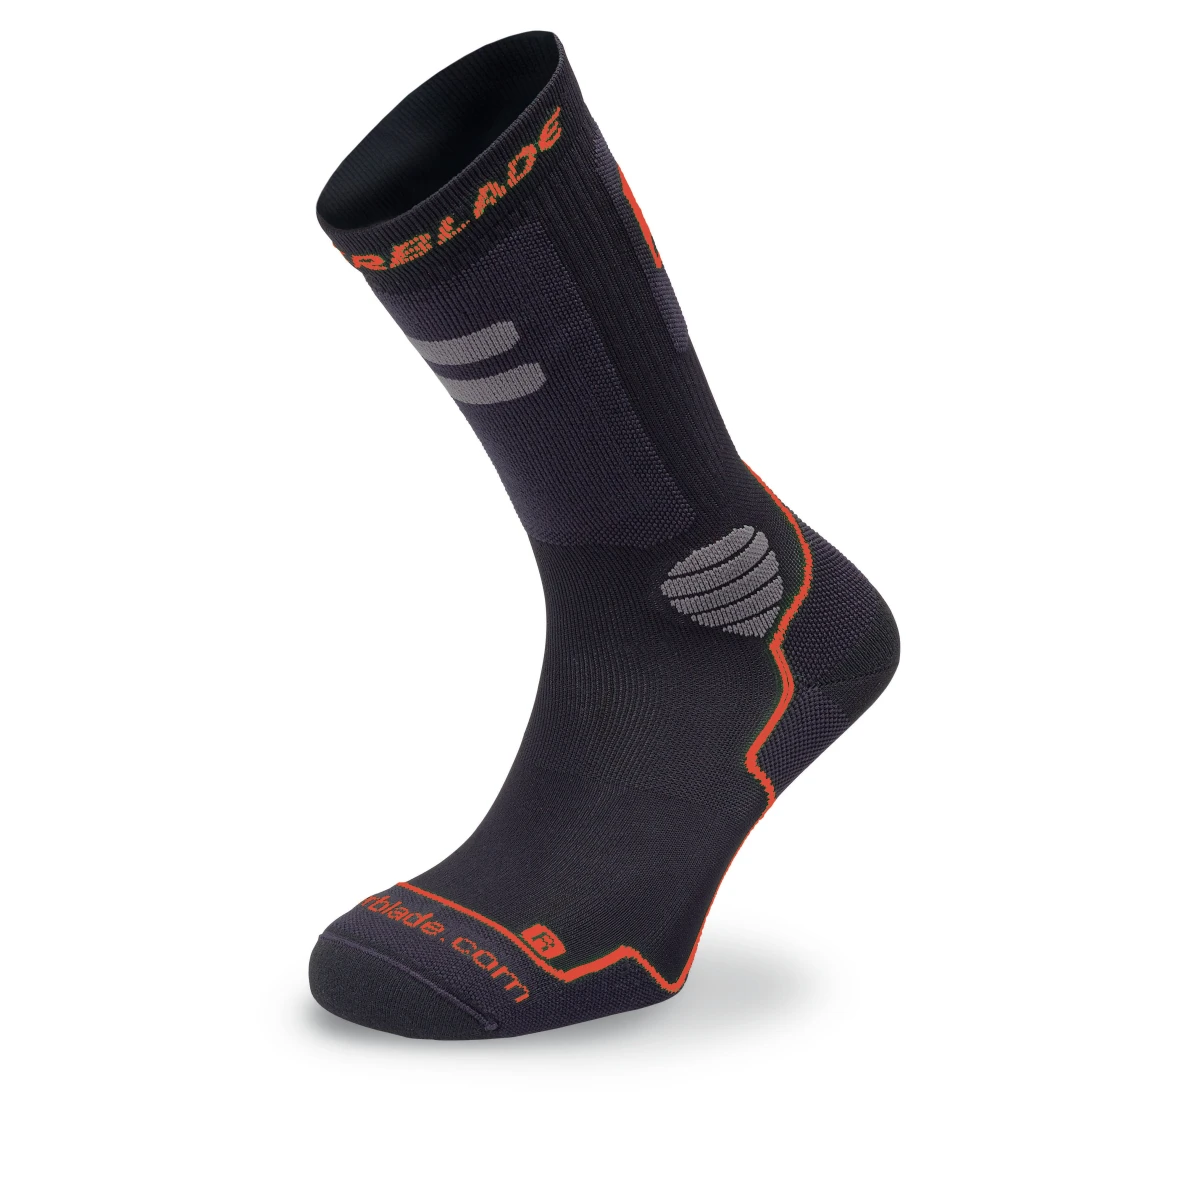 https://www.rollerblade.com/storage/thumbs/Product/2000_1200_resize__06A85000741_HIGH_PERFORMANCE_SOCKS_01.webp